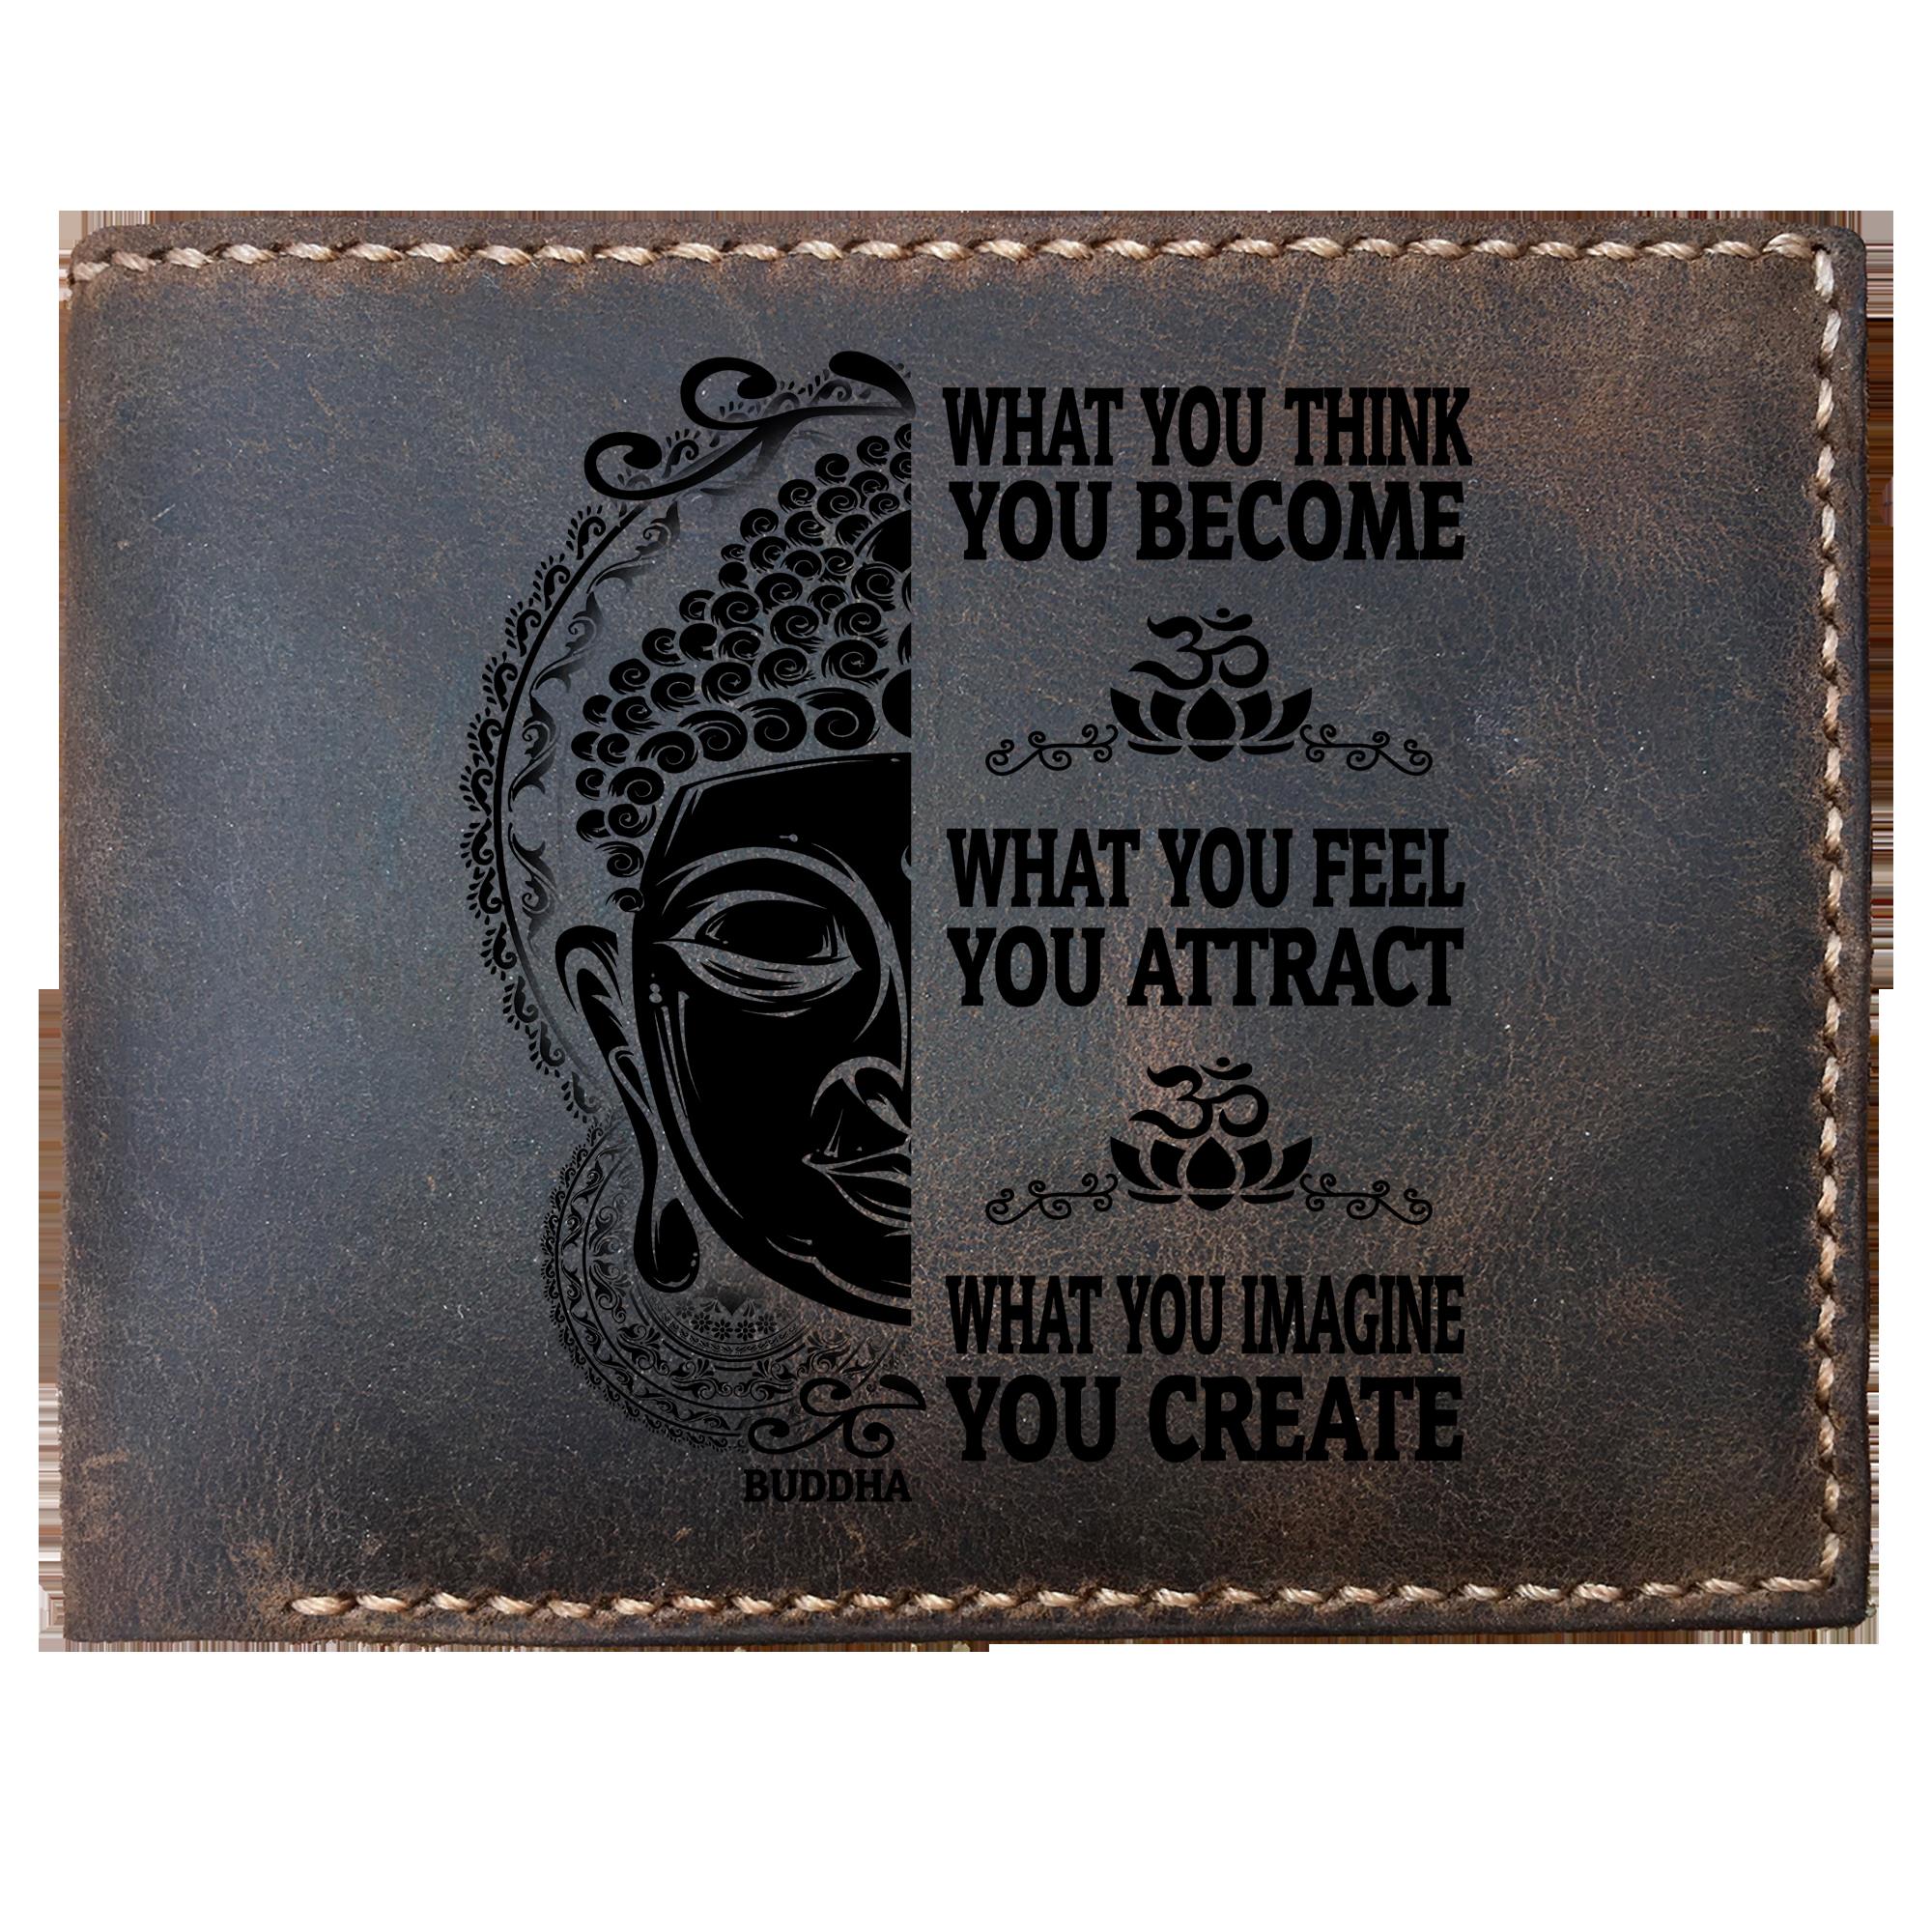 Skitongifts Funny Custom Laser Engraved Bifold Leather Wallet For Men, Funny Yoga Buddha What You Think You Become